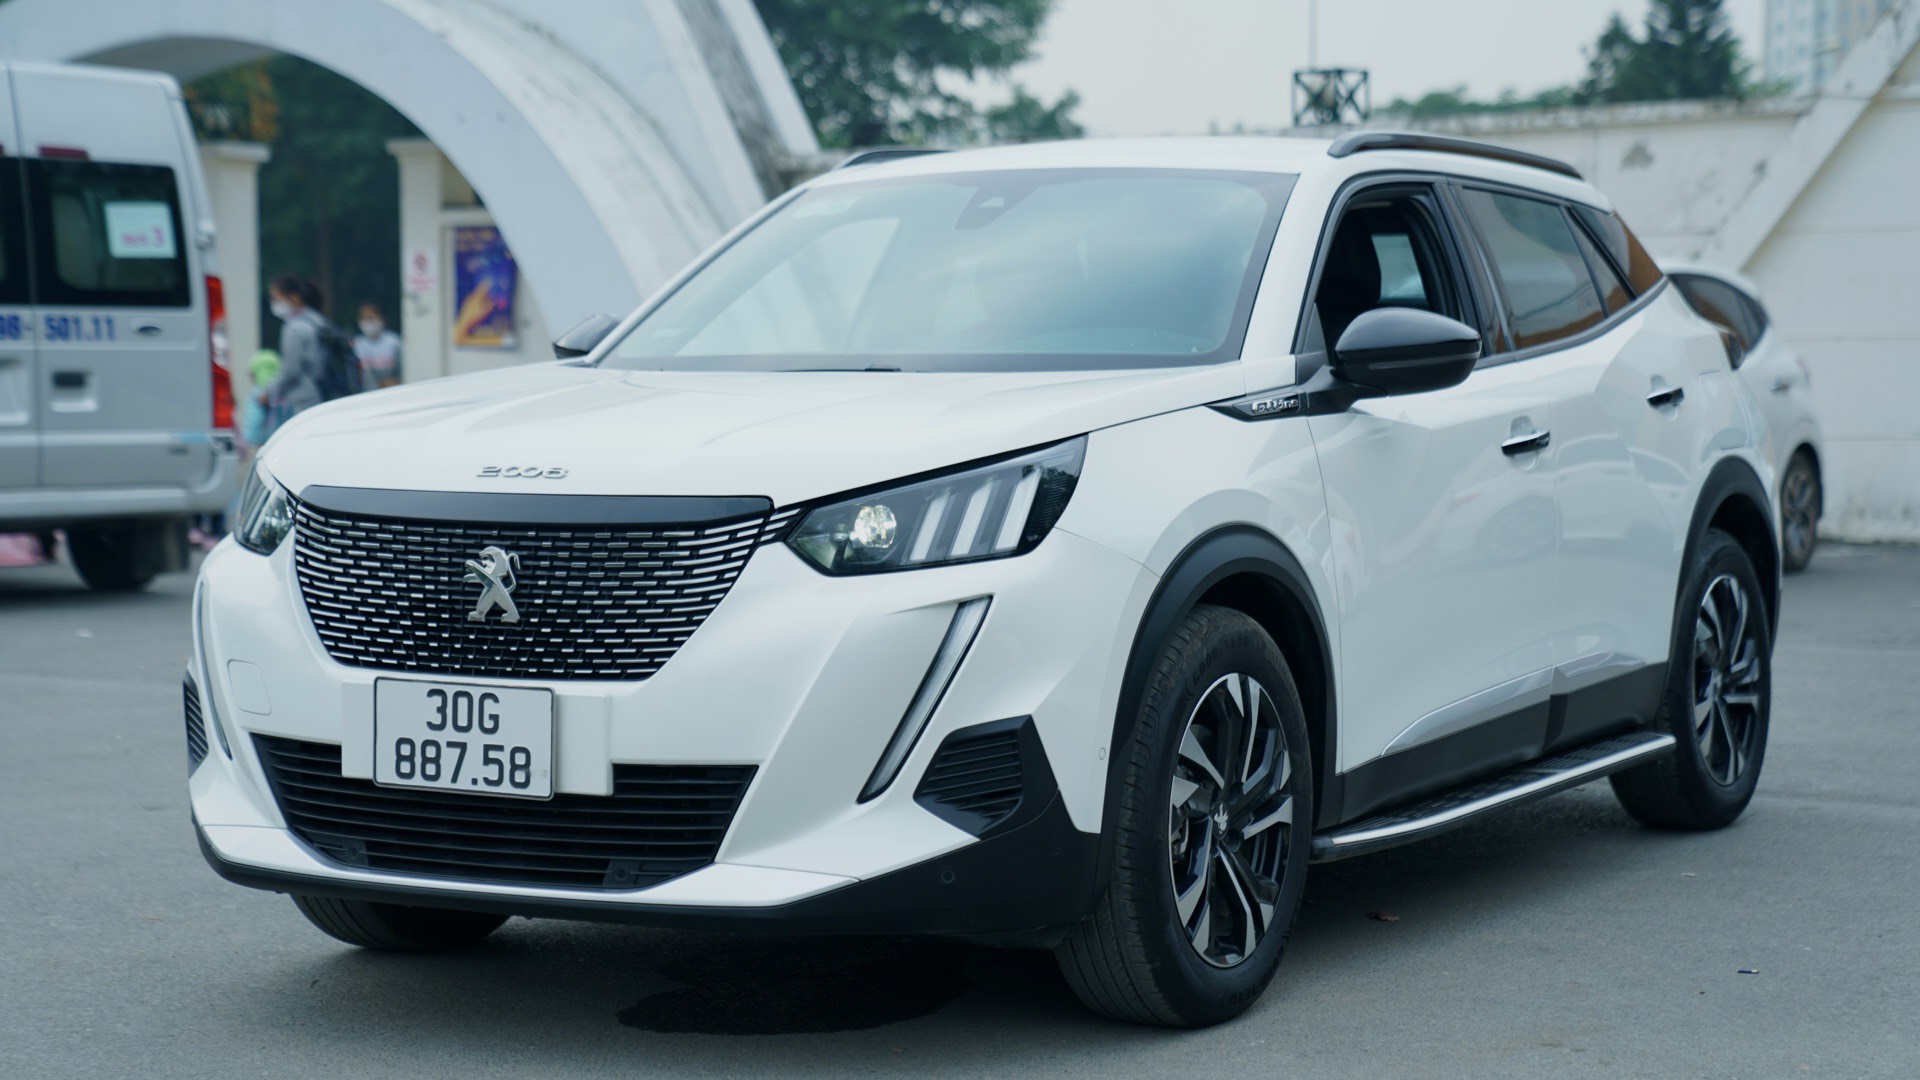 2021 Peugeot 3008 SUV  Interior Exterior and Drive  YouTube